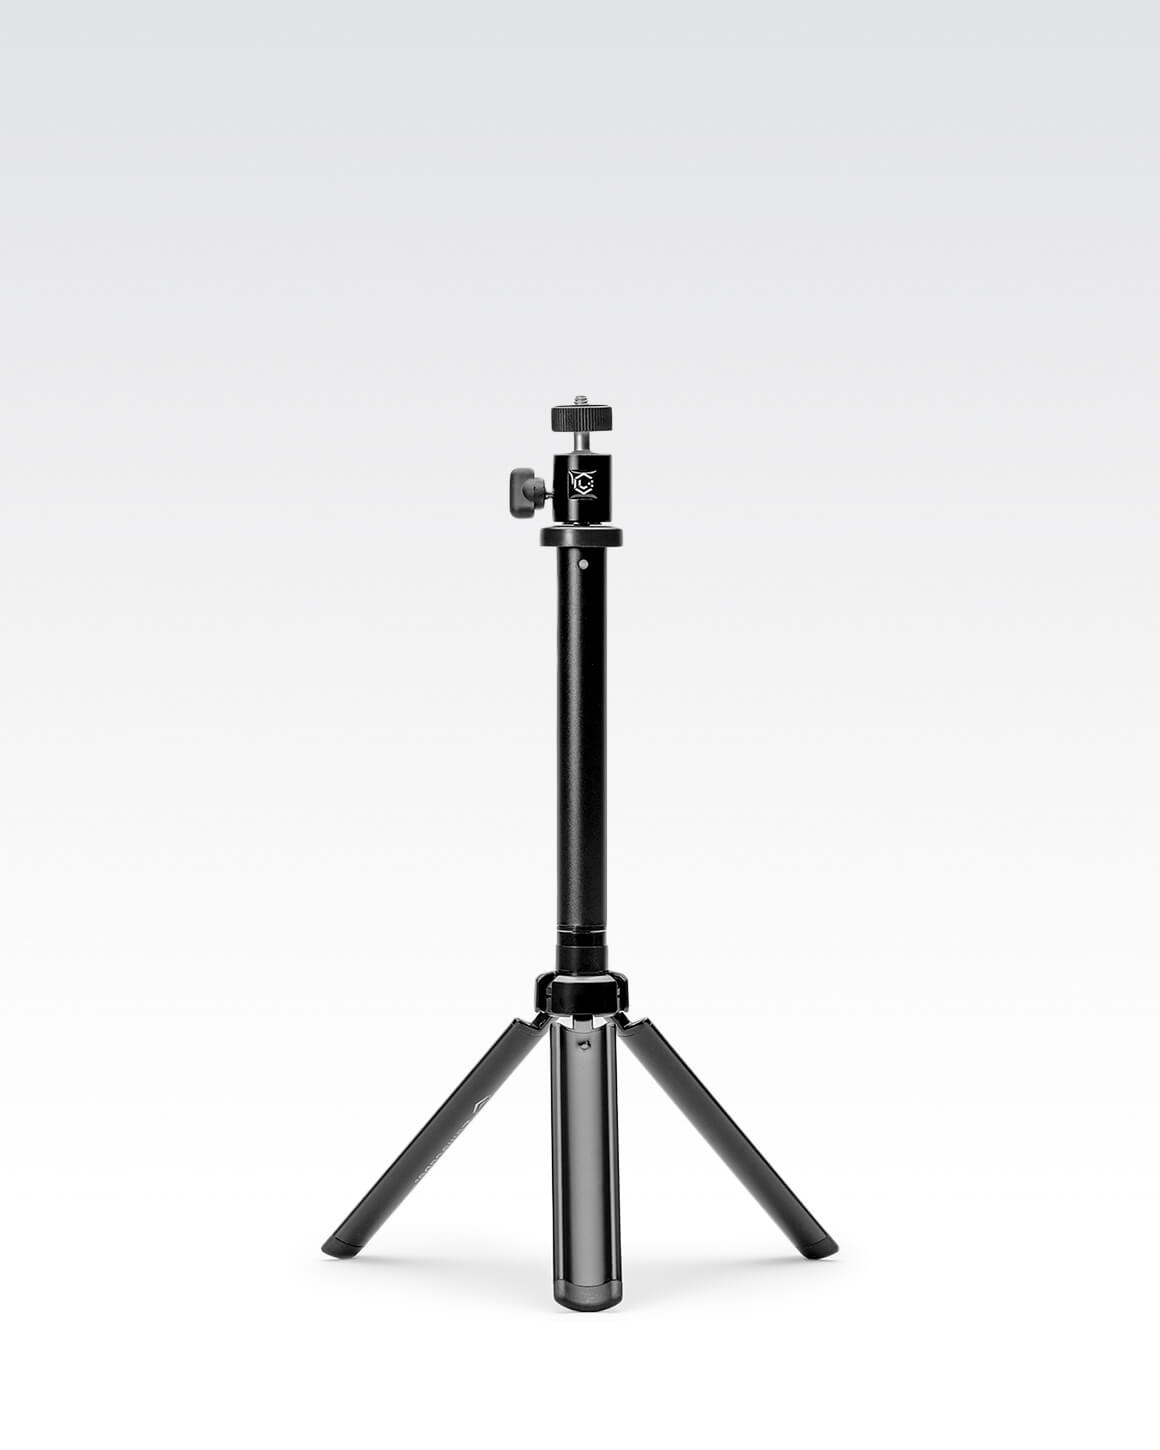 Black metal collapsible and portable 30" Lume Cube Adjustable Light & Webcam Stand with Rotating Mount.